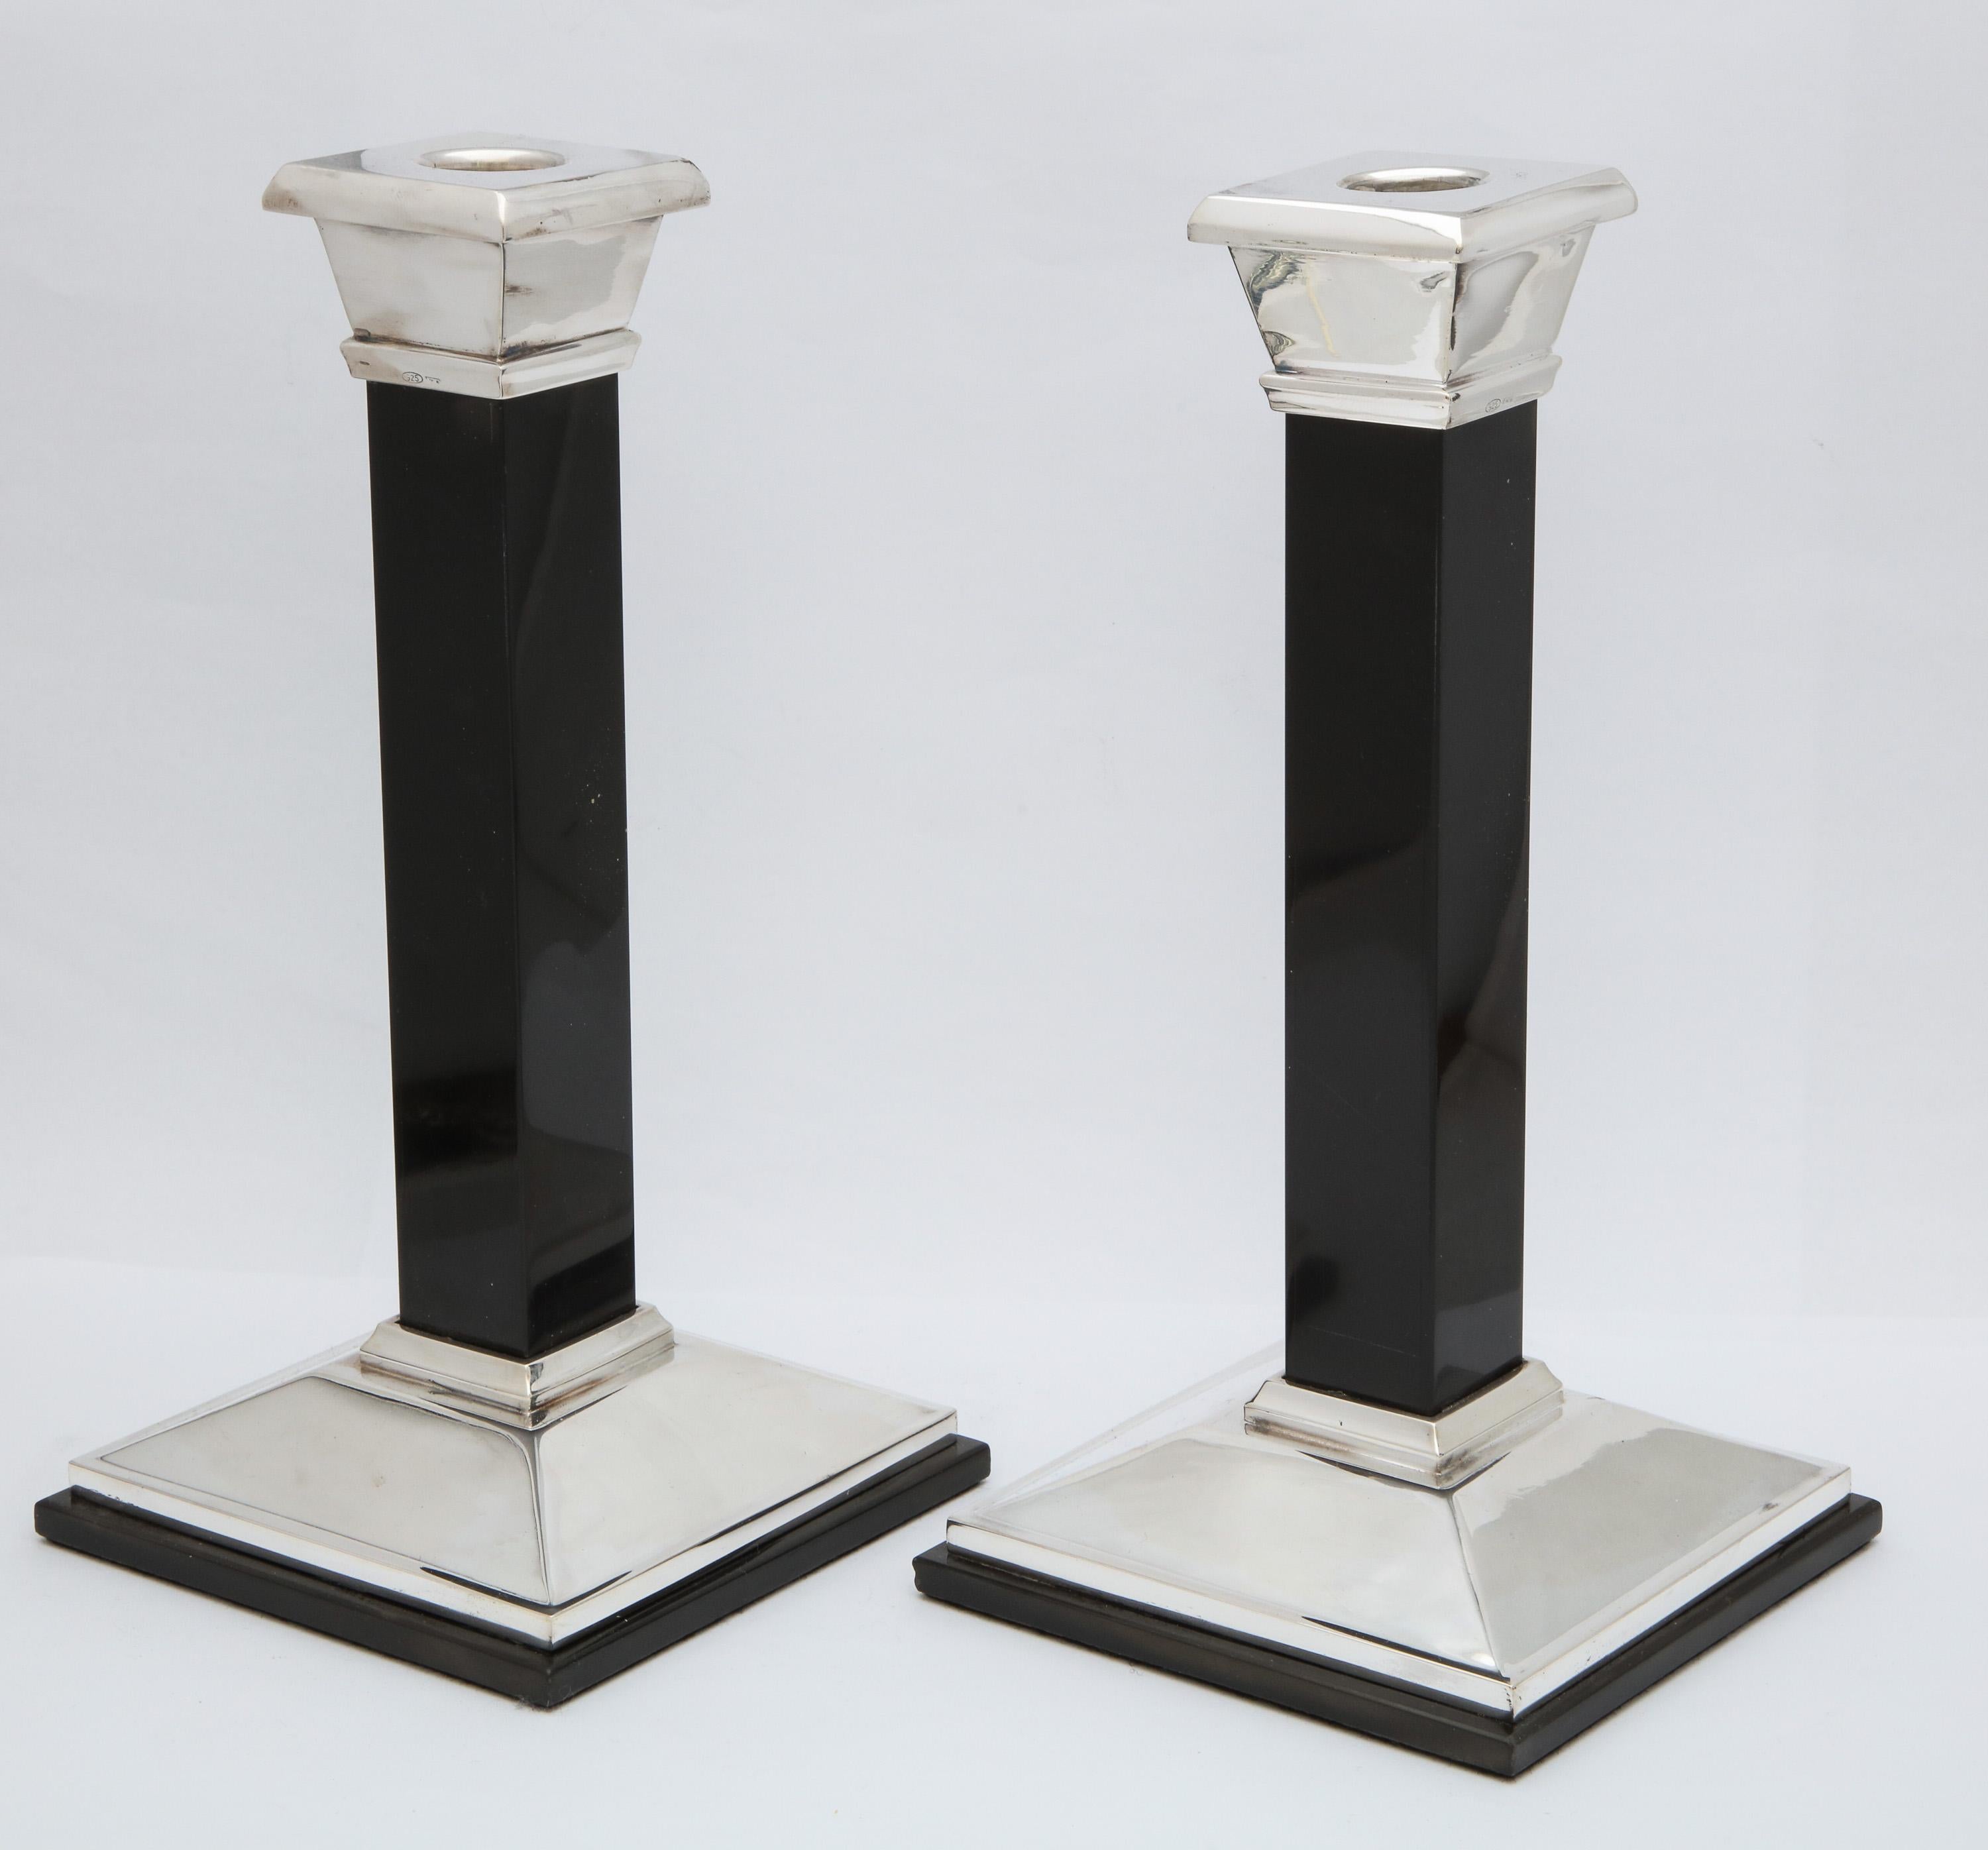 Pair of tall, Neoclassical-style, sterling silver and black onyx candlesticks made for Tiffany and Co. in Italy and retailed in New York, circa 1980's. Weighted. The pair measures 9 3/4 inches high x 4 3/4 inches deep x 4 3/4 inches wide. Dark spots